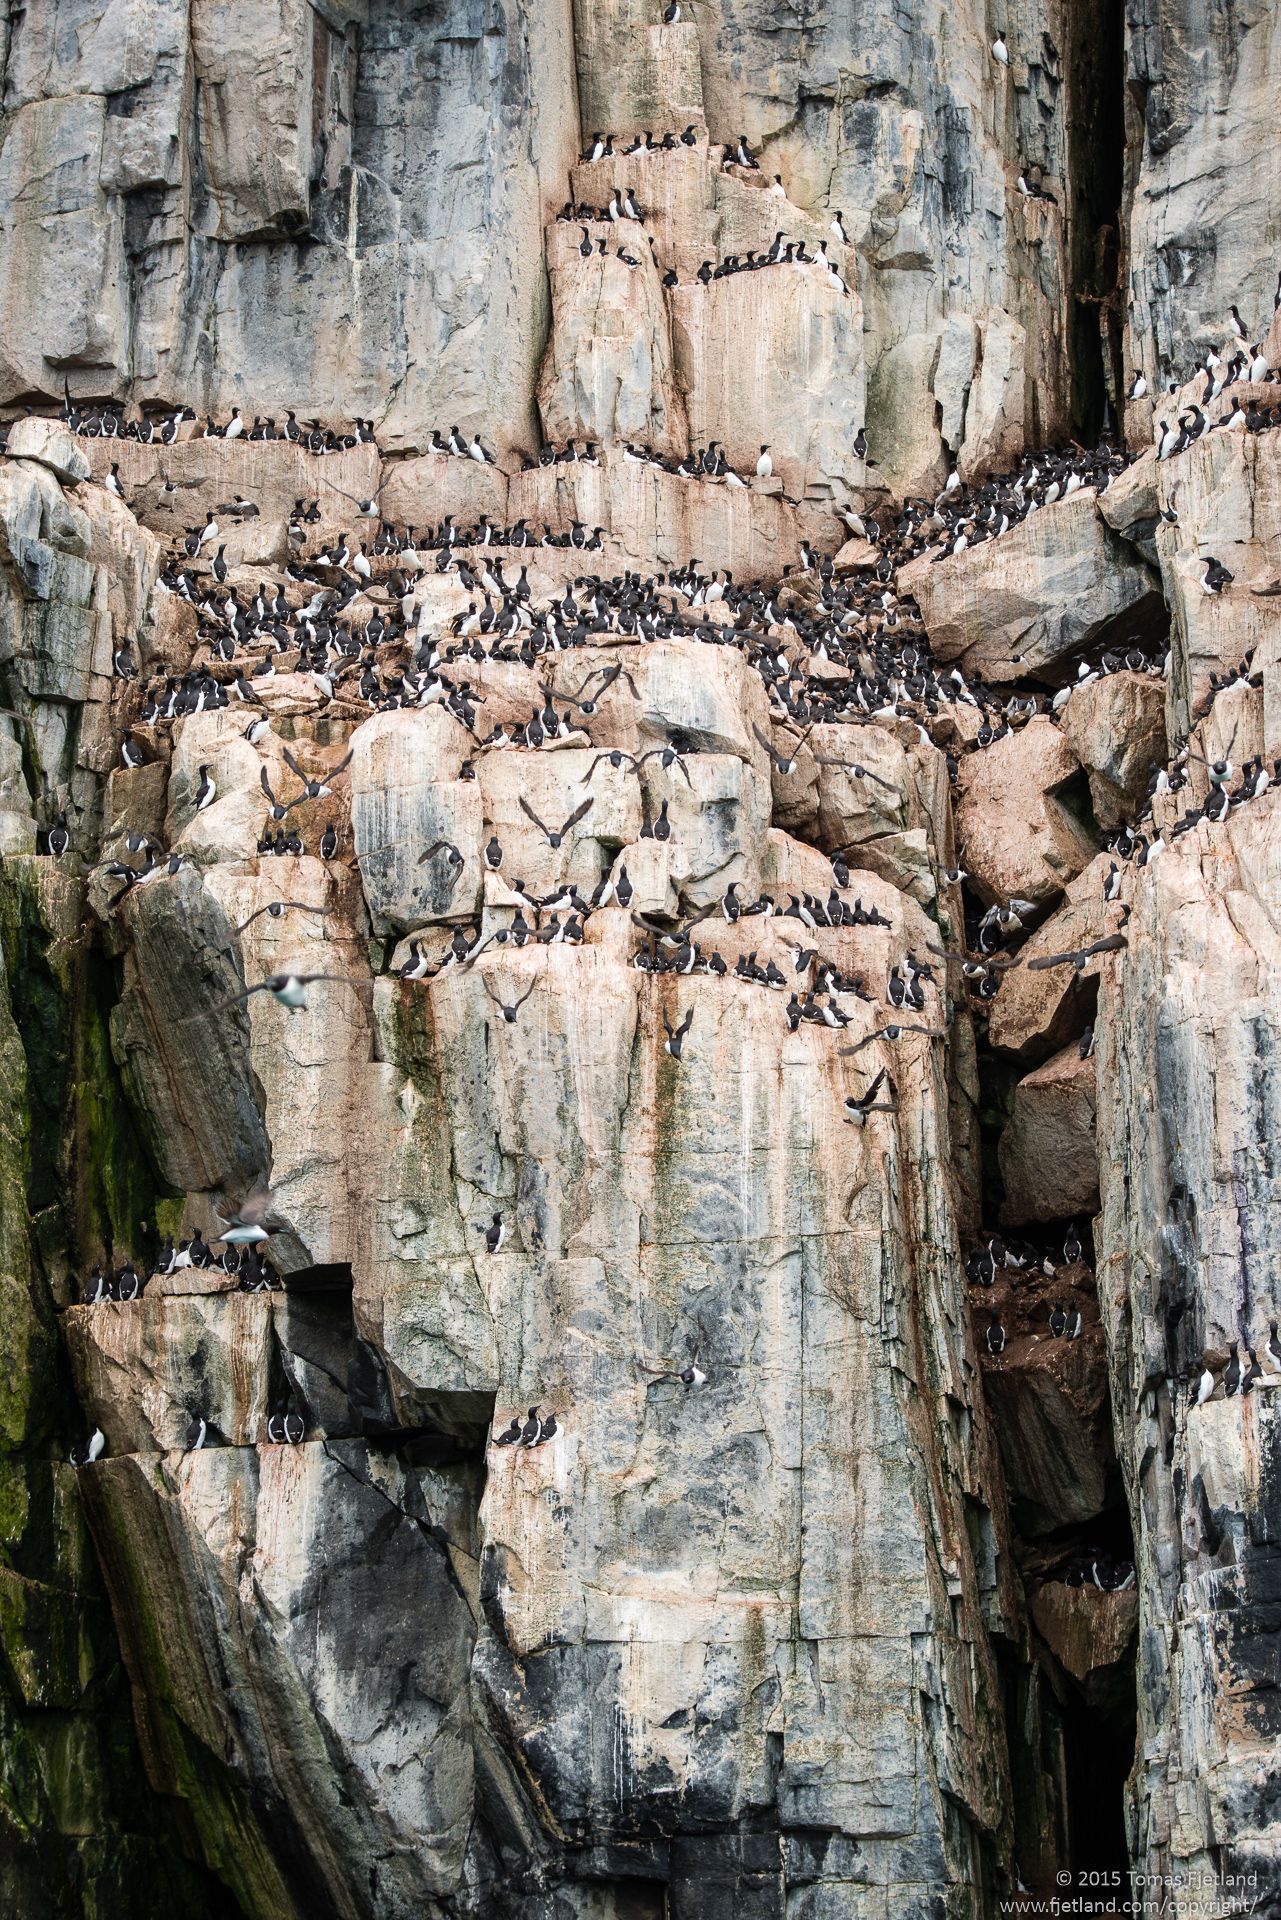 Every available spot in the cliffs are filled with Brünnich's guillemot